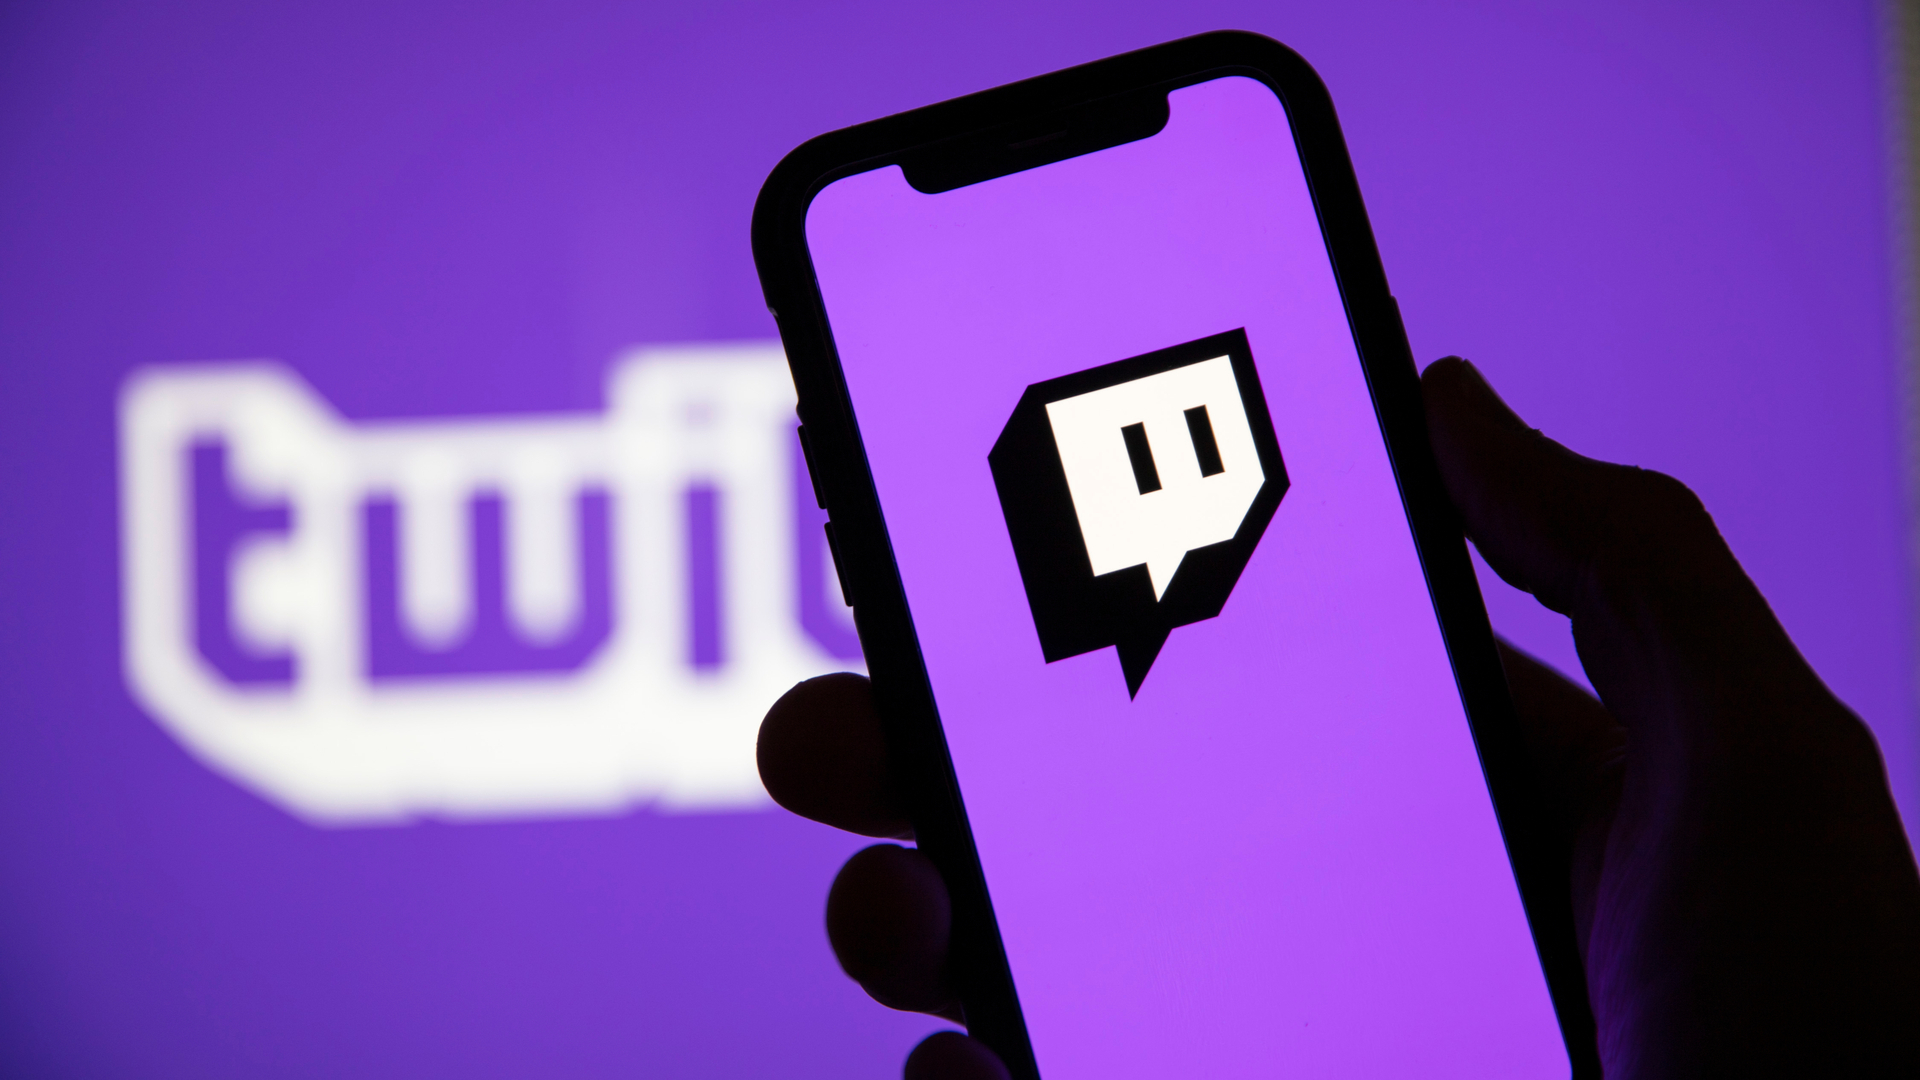 Twitch solidifies its lead with viewership up 21% in Q1, while   Gaming drops